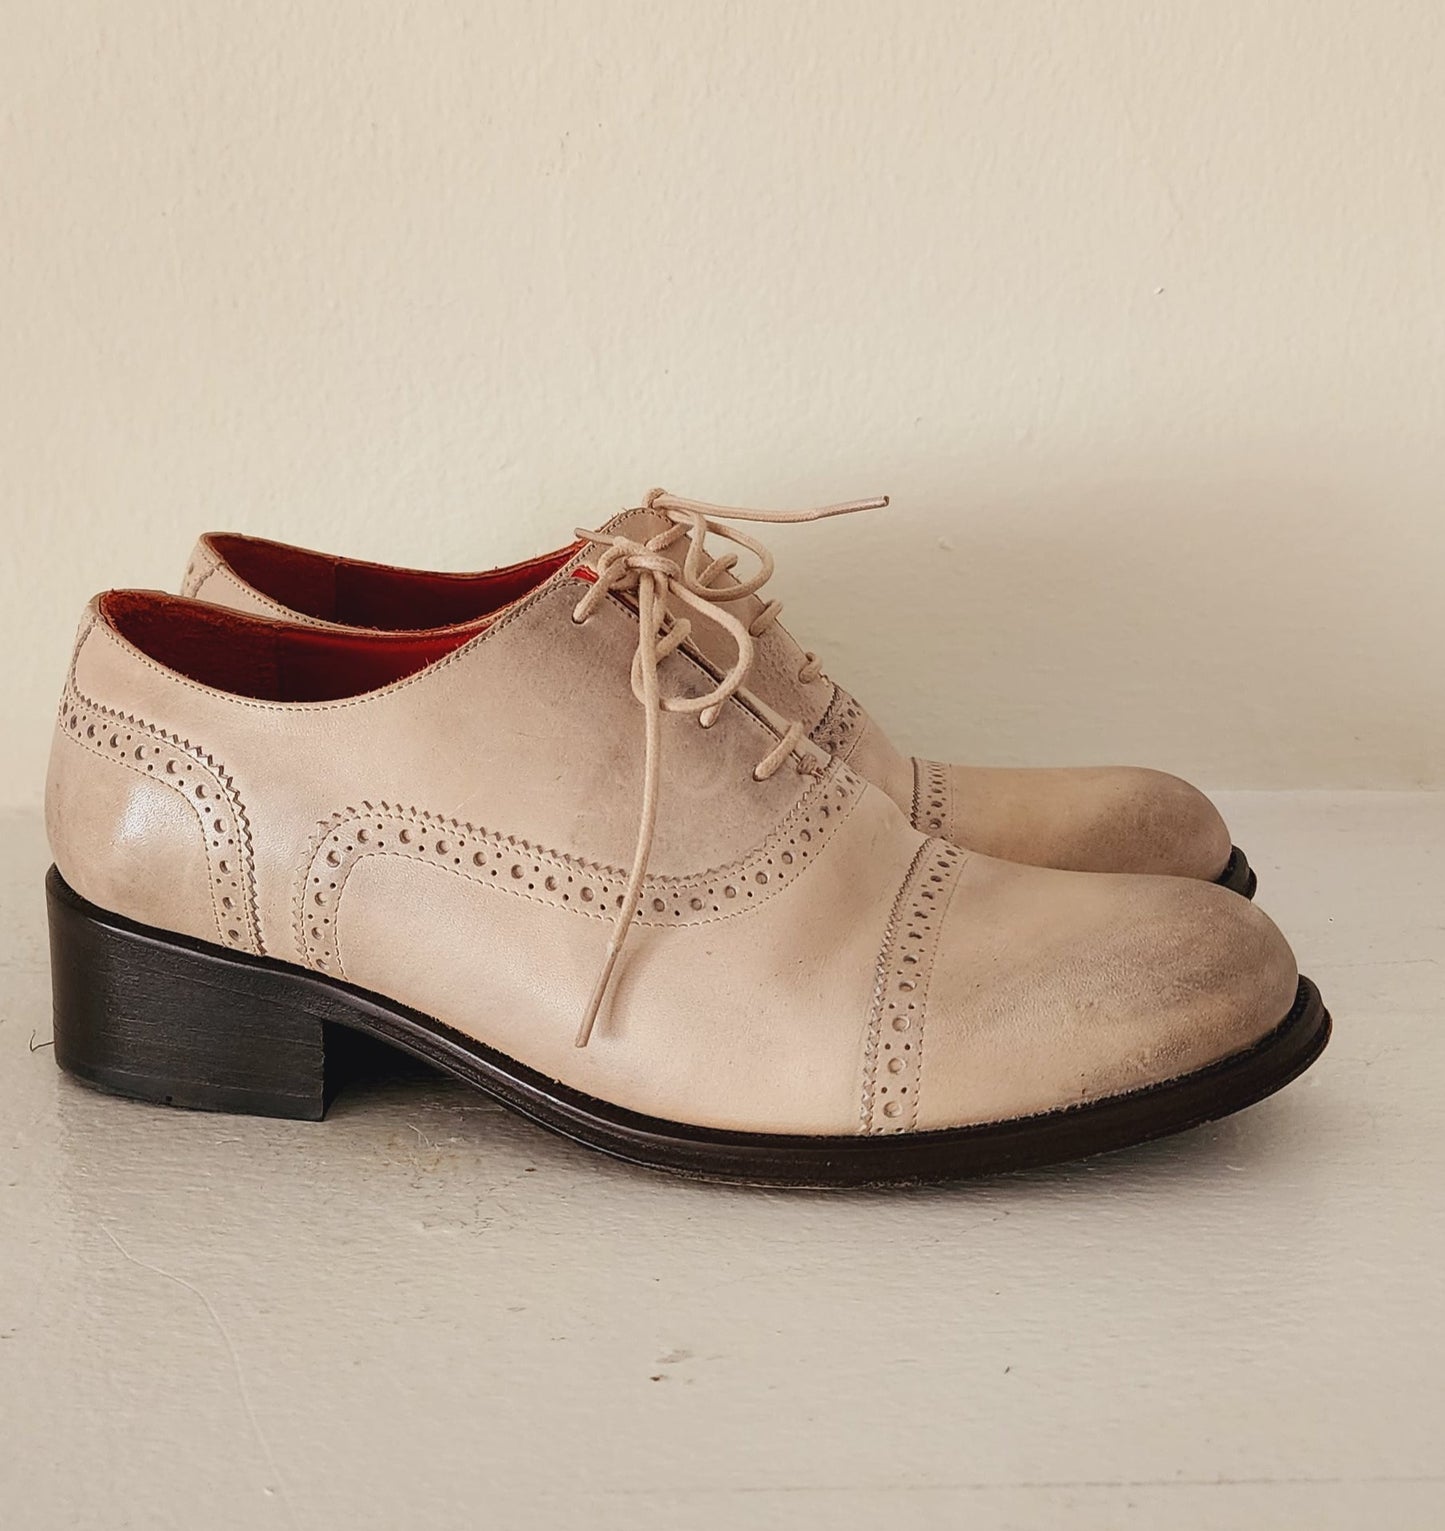 Cream Leather Lace-Up Oxfords Shoes by Alcala's / Womens 9